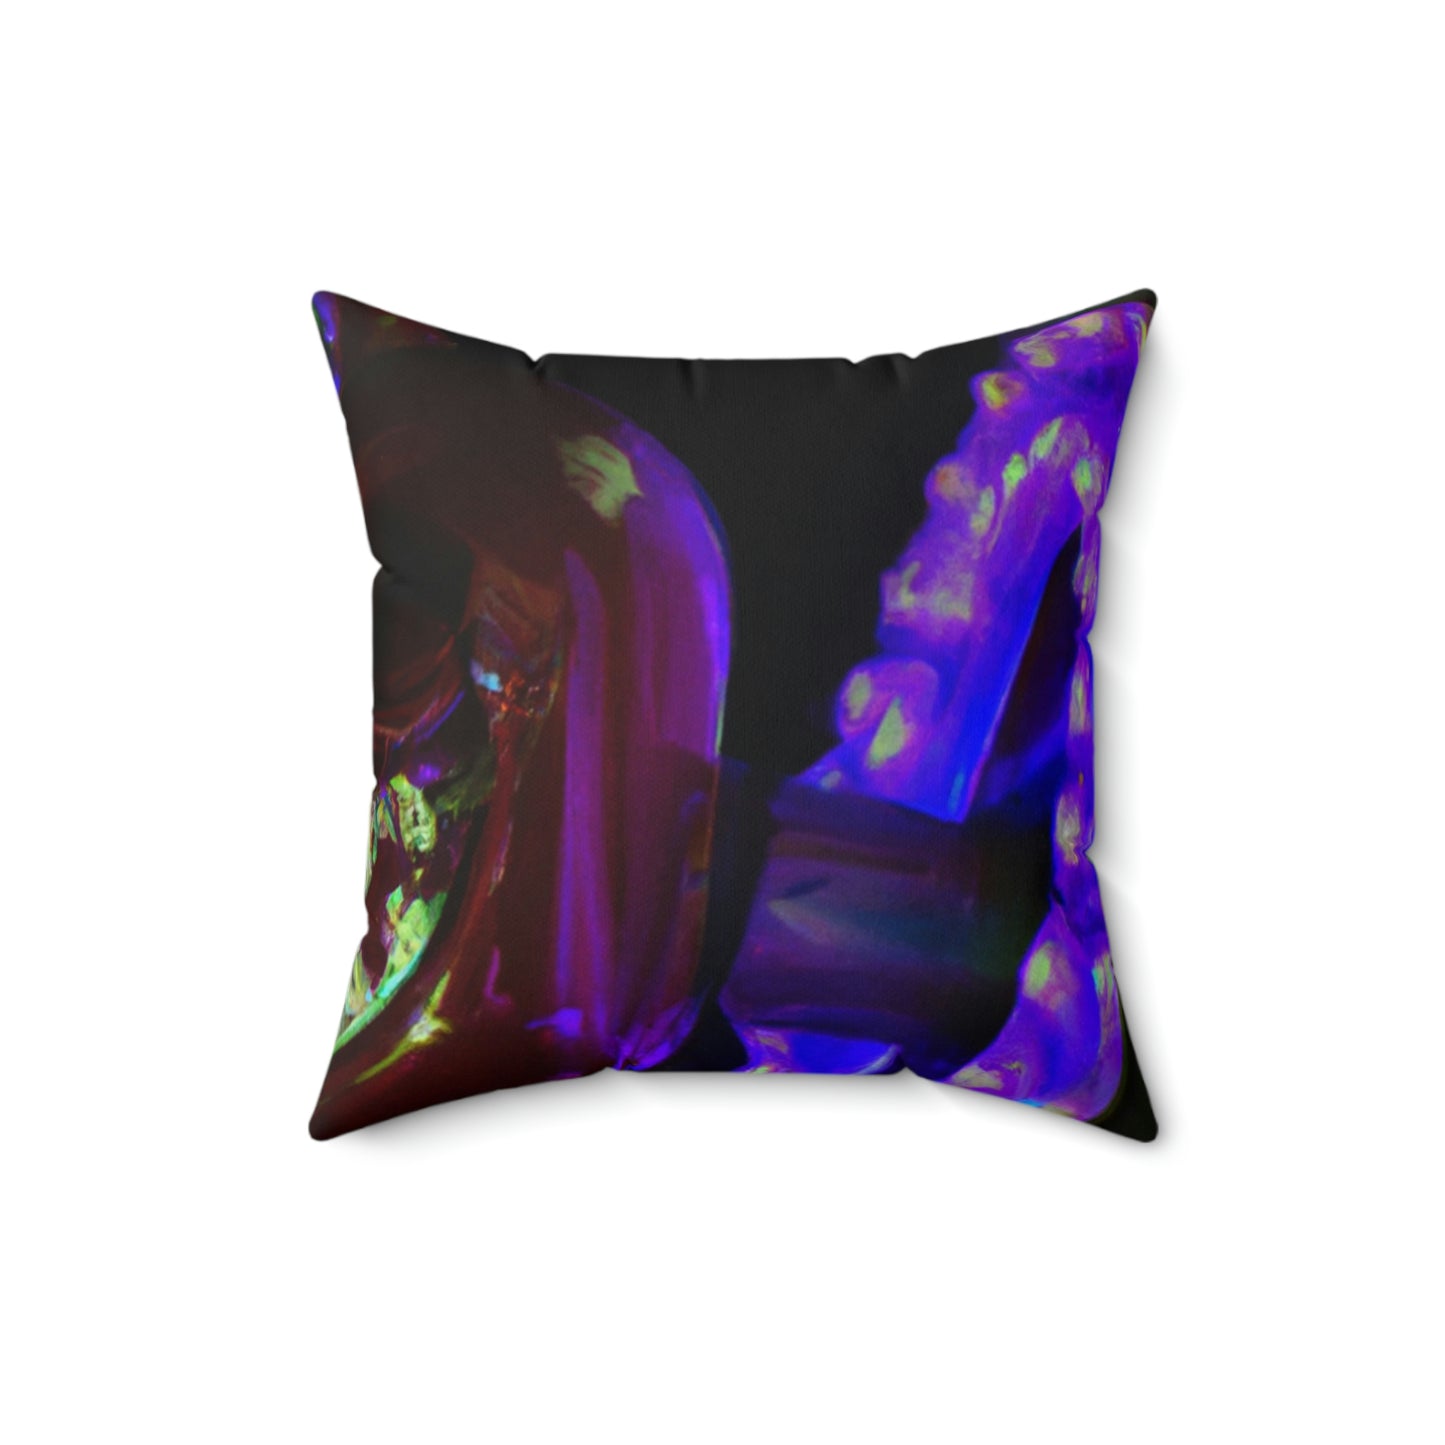 "Carnivale of the Damned" - The Alien Square Pillow